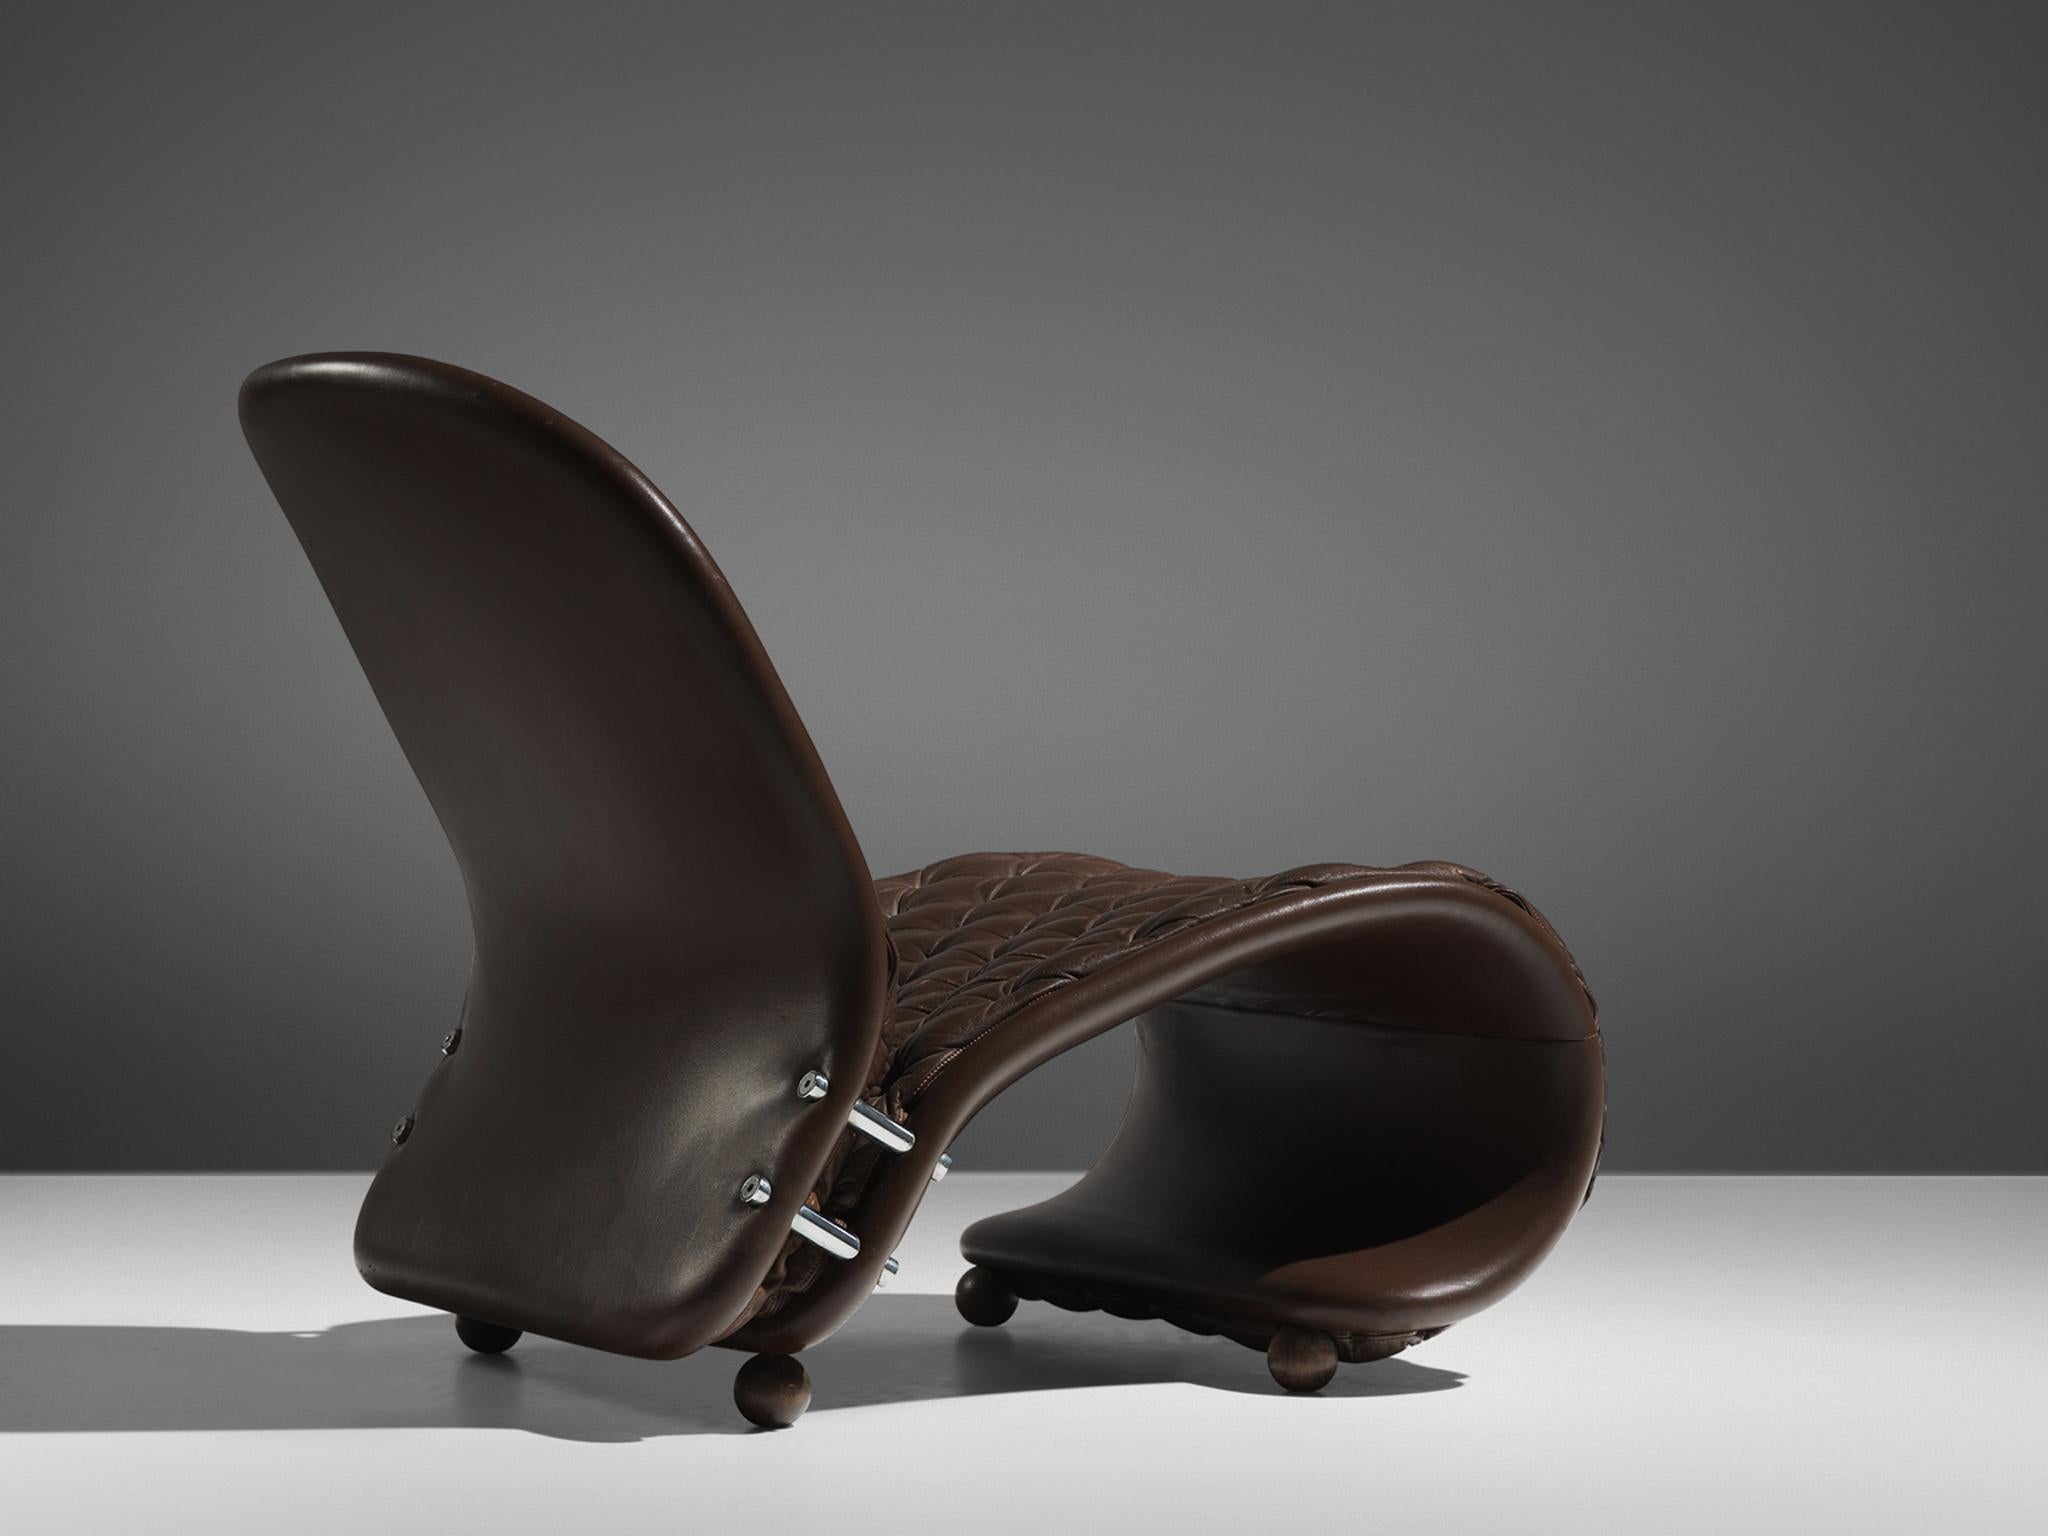 Verner Panton for Fritz Hansen, easy chair 'Model G', in brown leather, Denmark, 1973. 

'Model G' chair from the 1-2-3 system in dark brown tufted leather. This lounge chair features a distinctive shape. This icon is designed by Verner Panton in